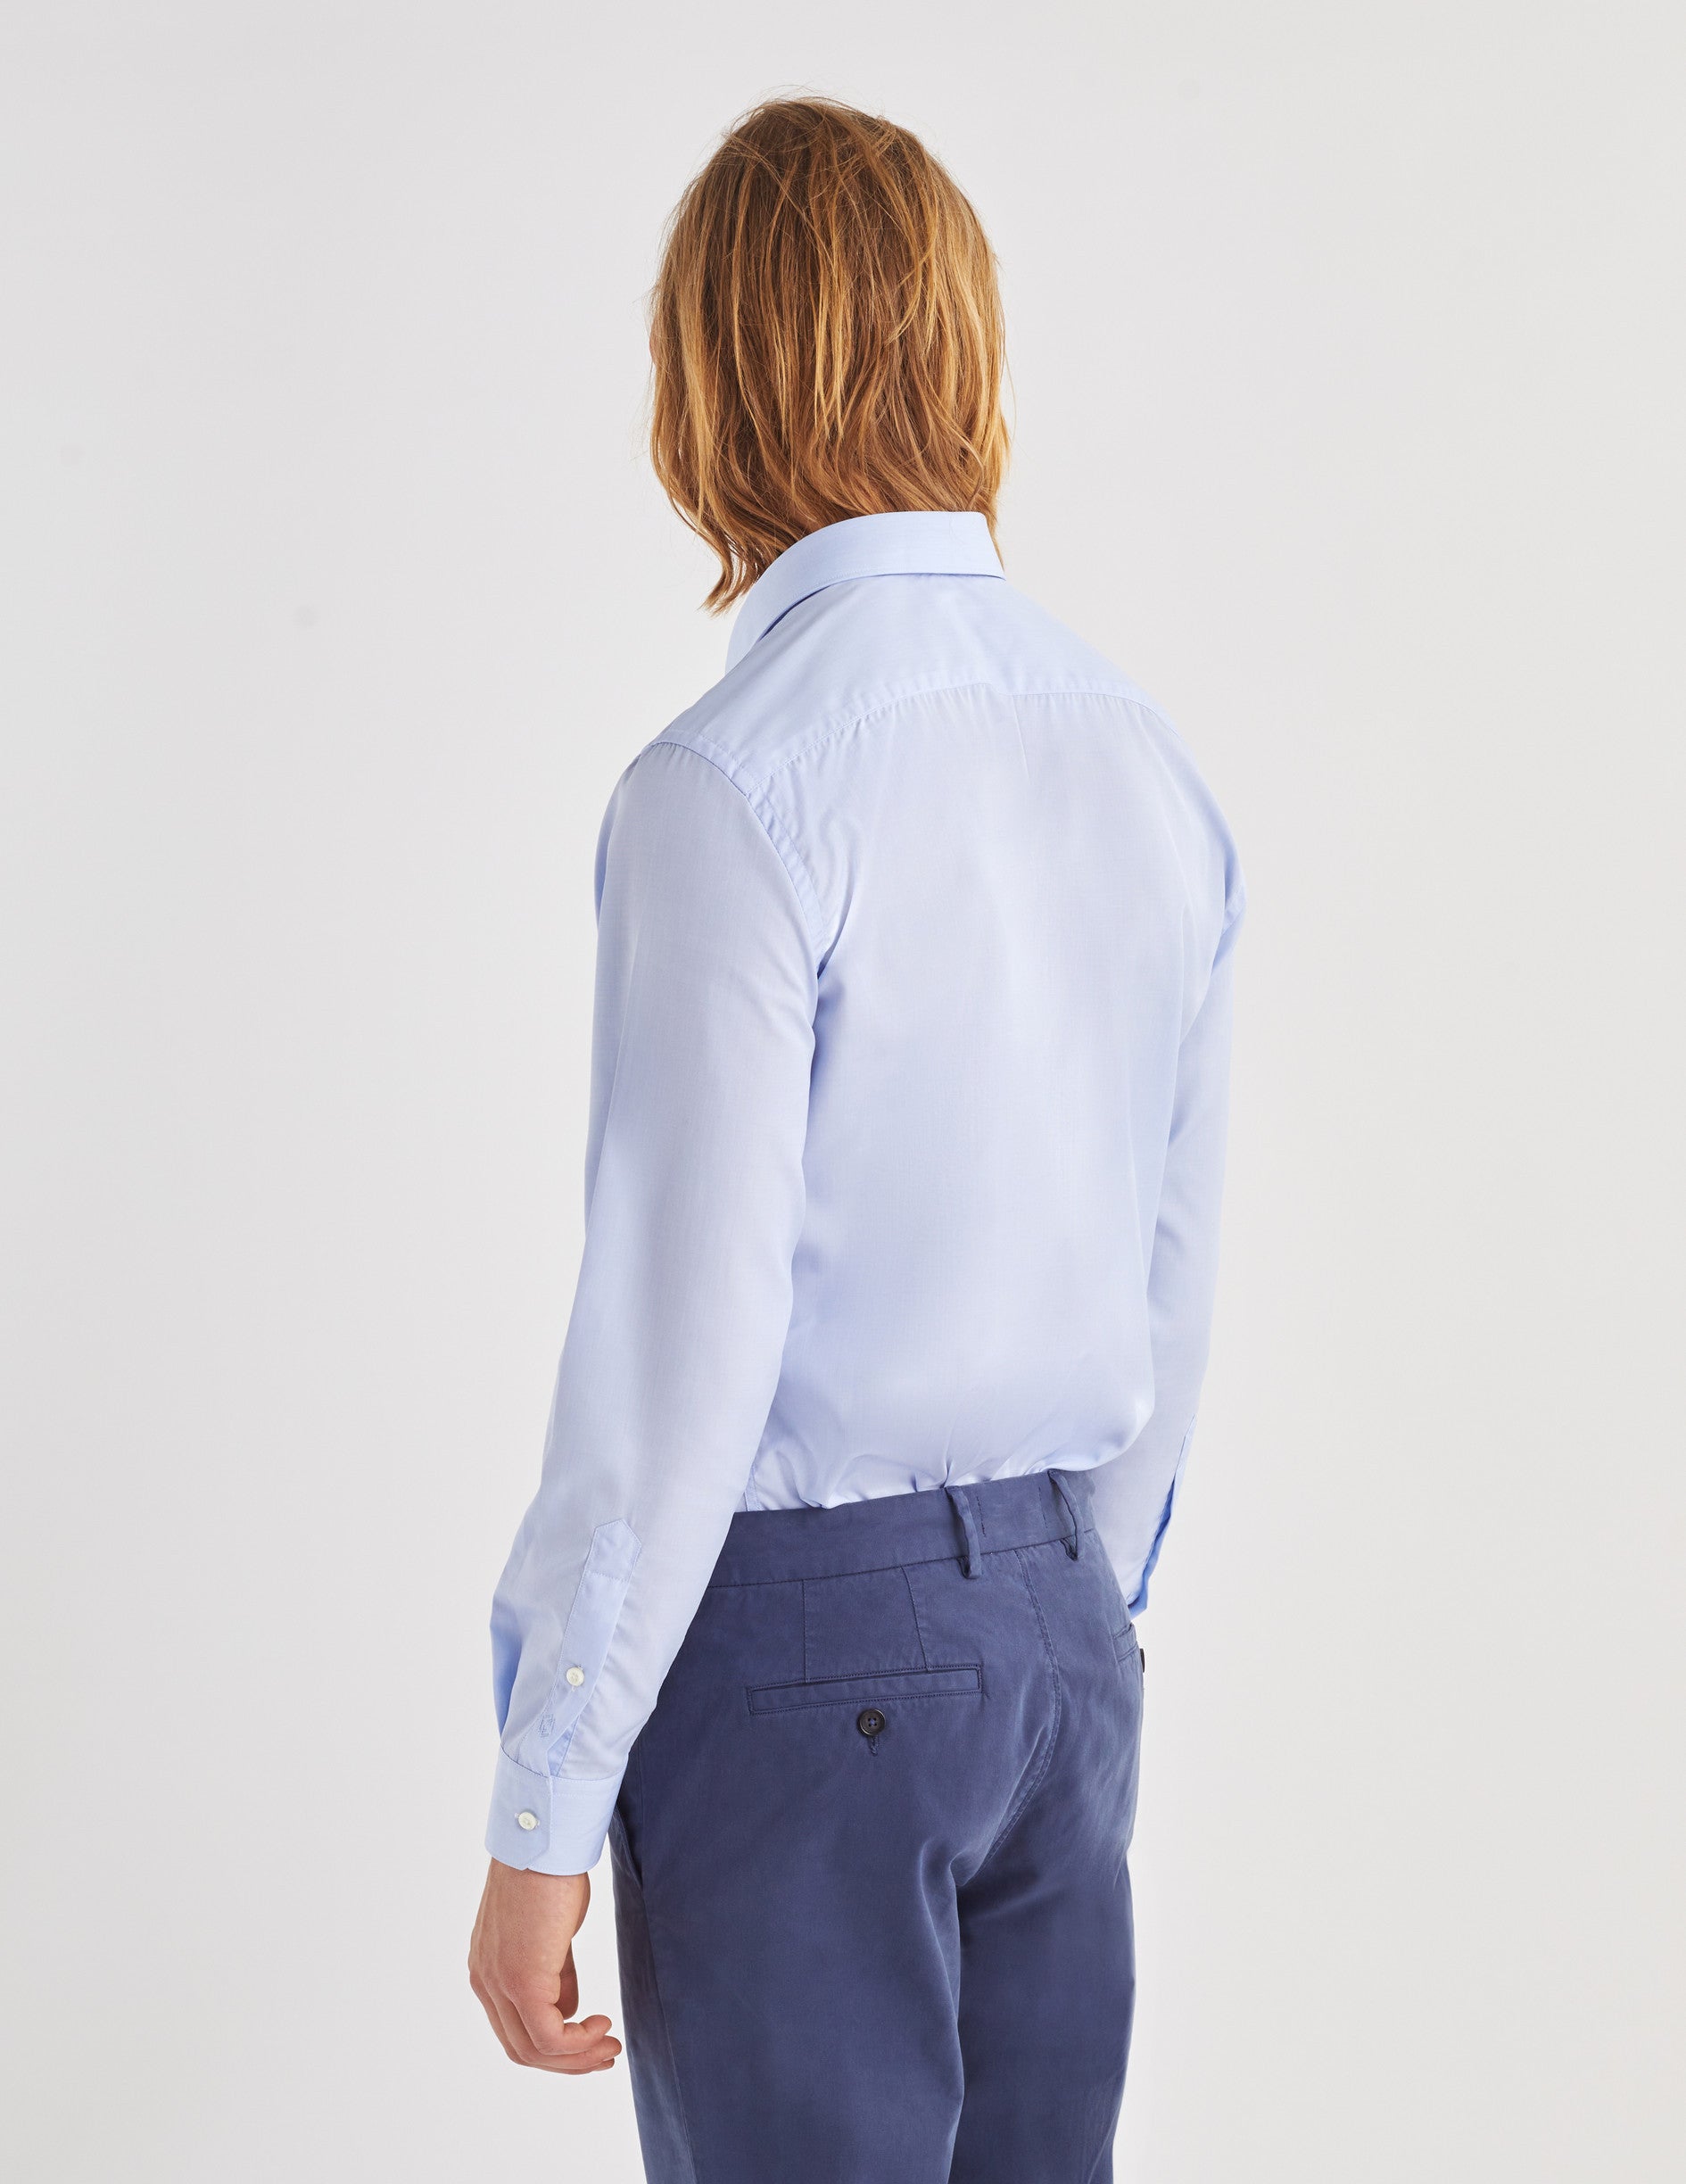 Fitted blue wrinkle-free shirt - Wire to wire - Figaret Collar